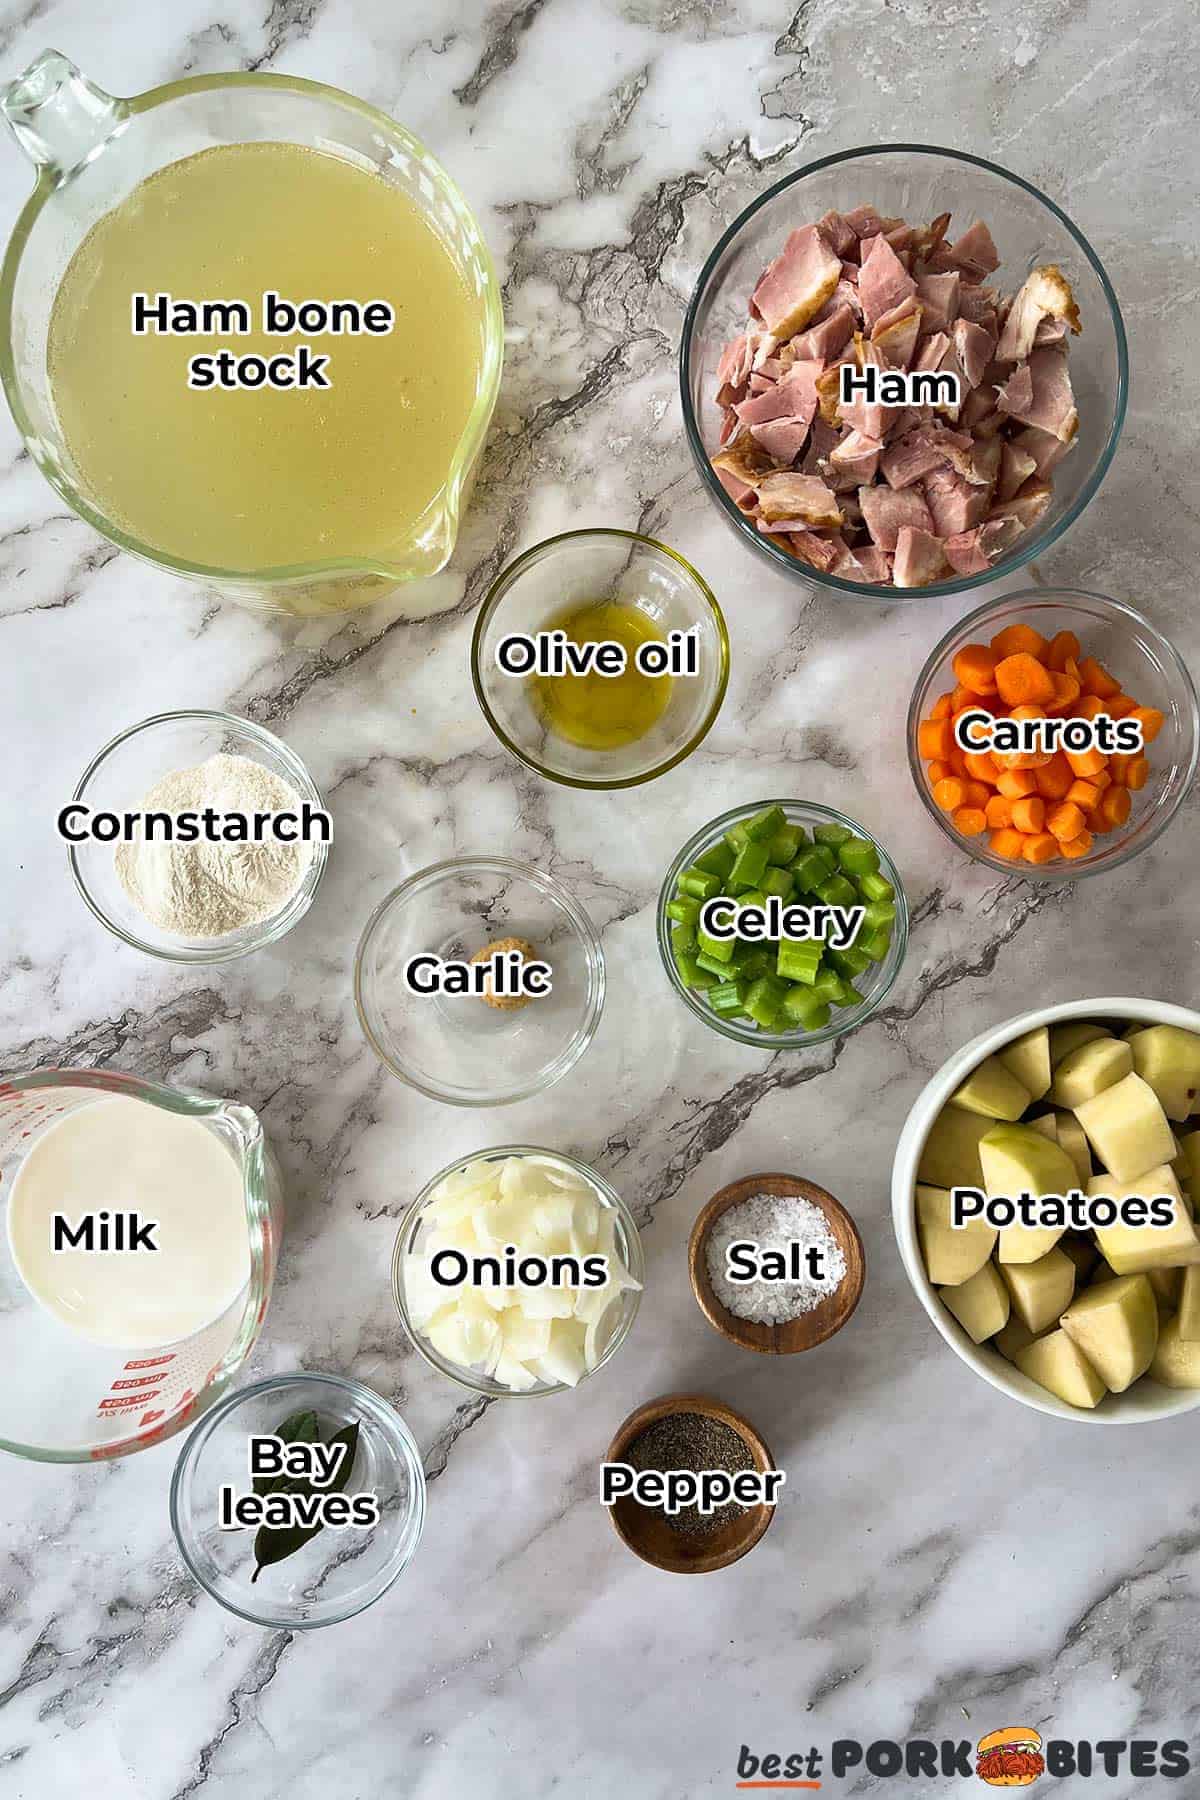 the ingredients for ham bone soup in separate bowls with labels